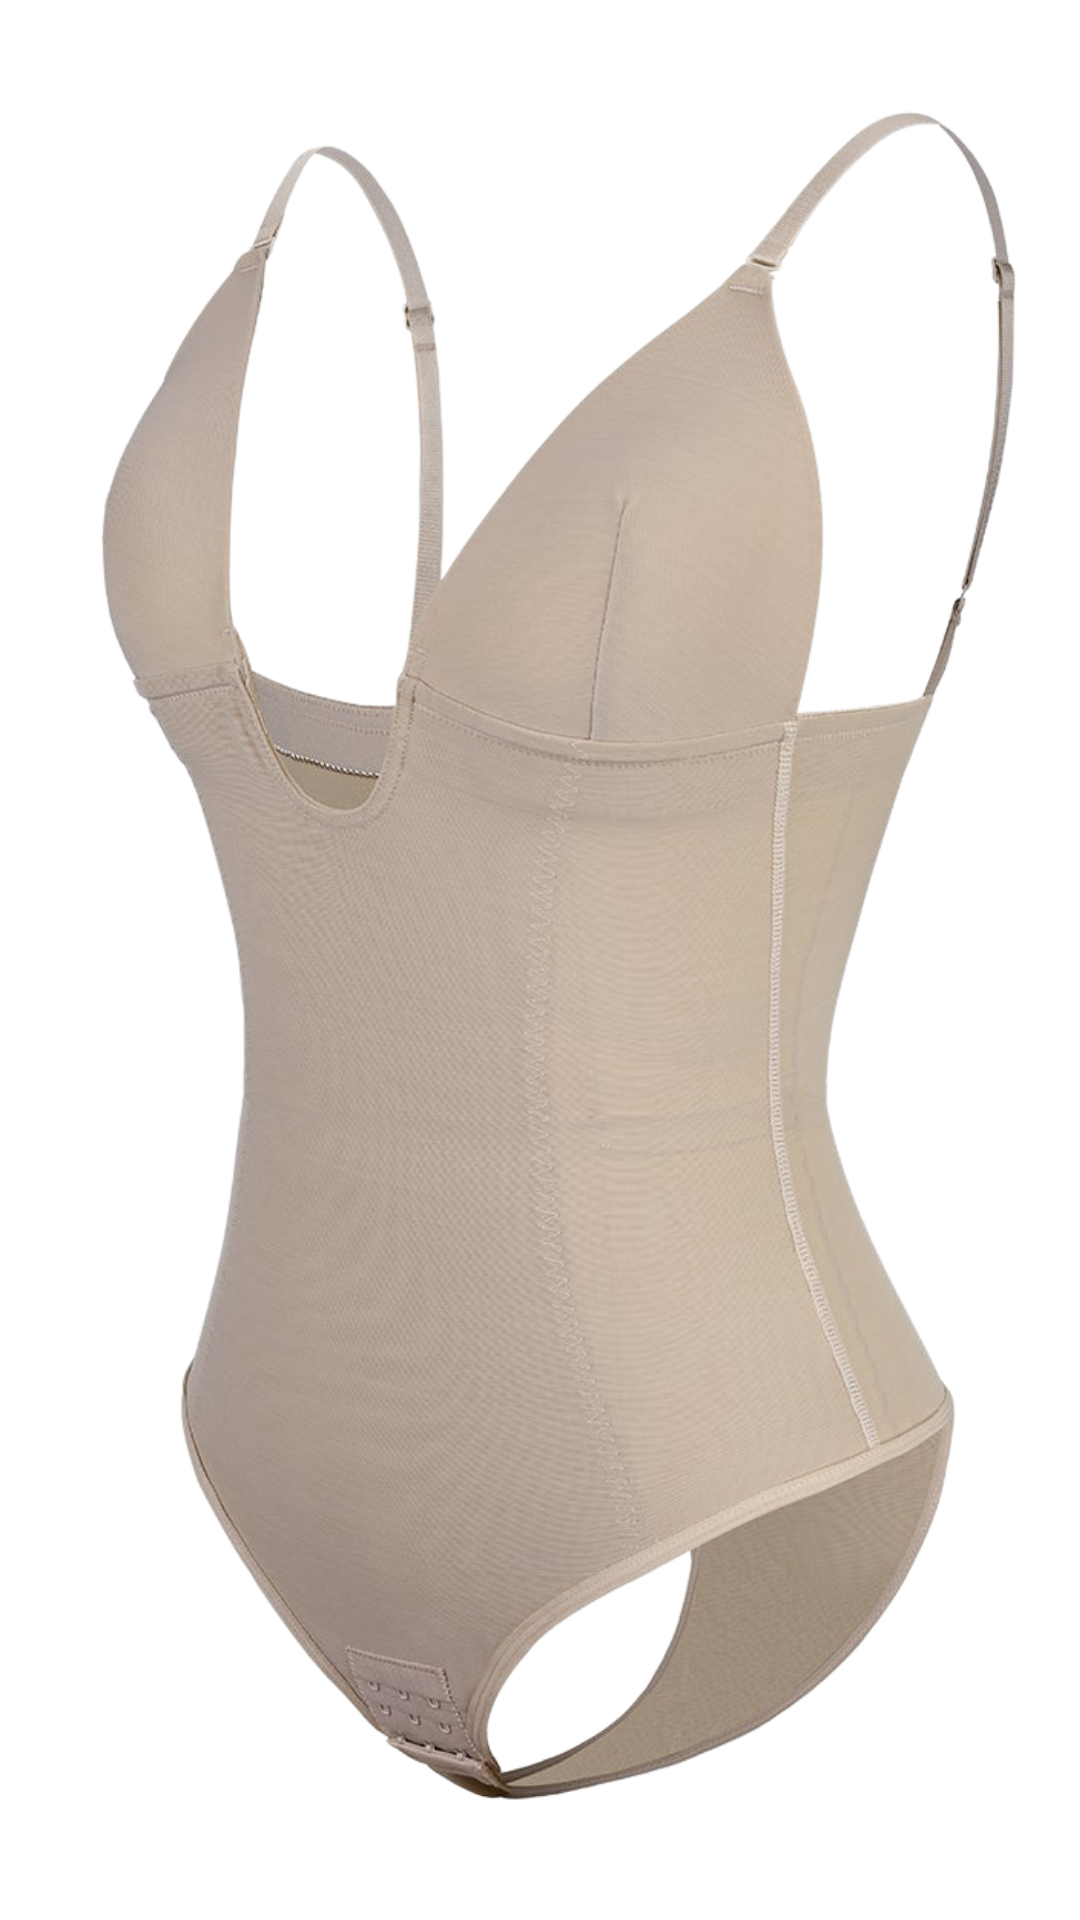 Plunge Low-back Body Suit / Backless Body Suit/ Body Suit Clear Straps